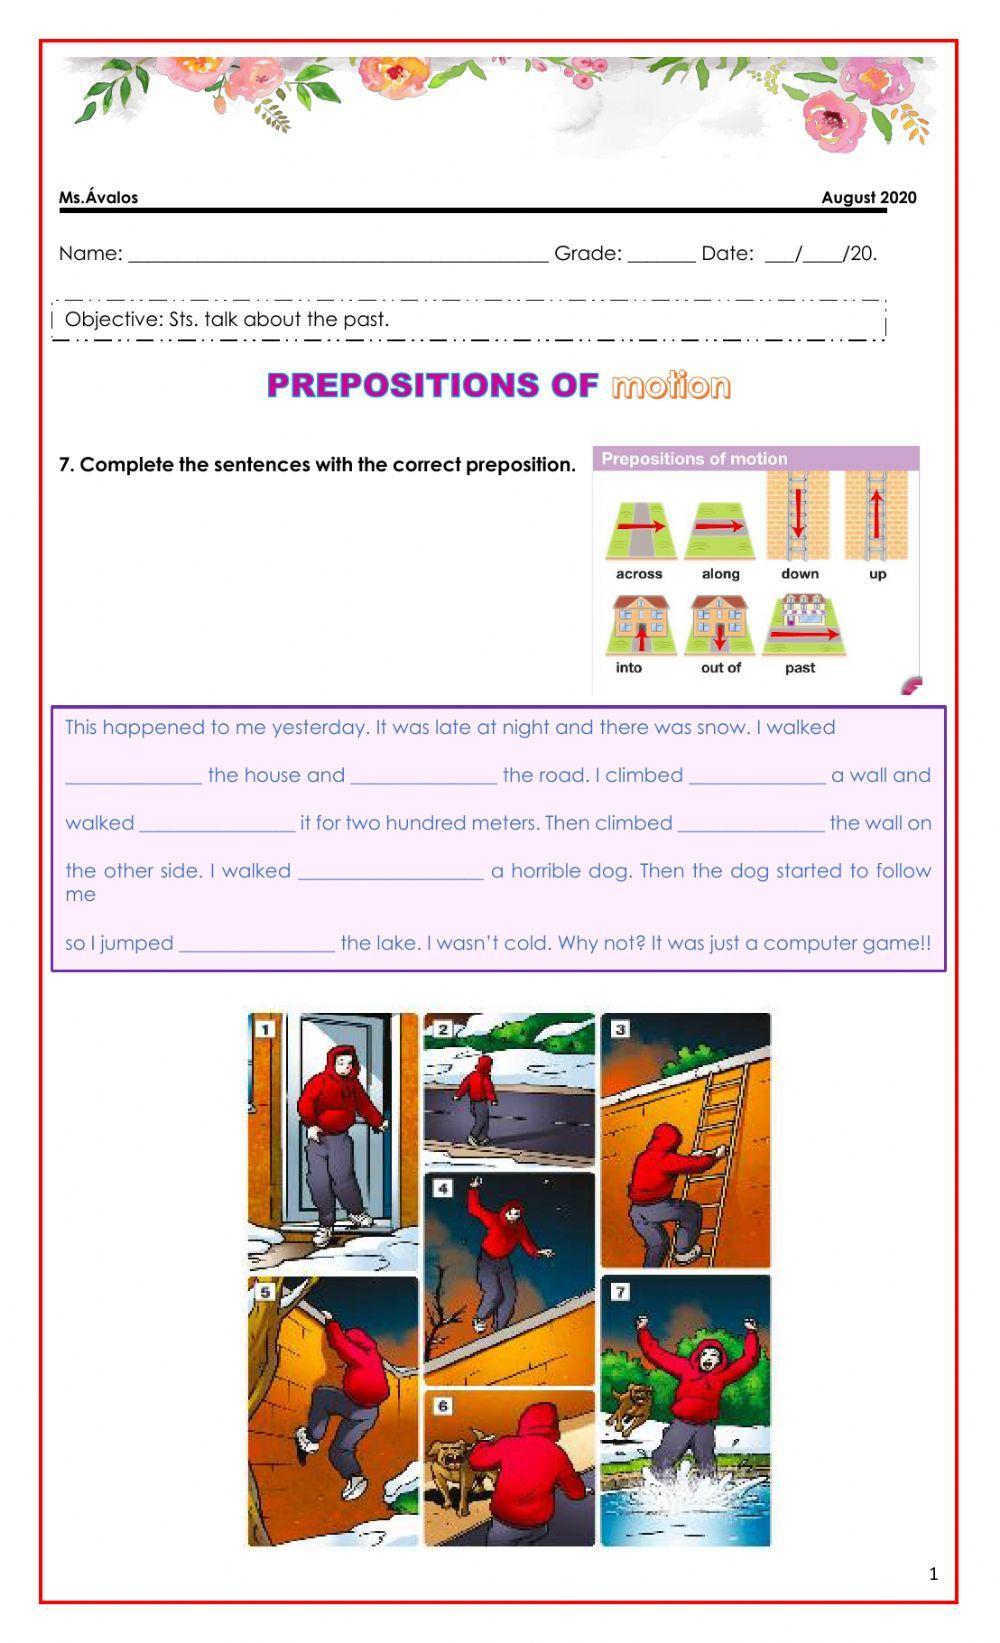 Prepositions of motion